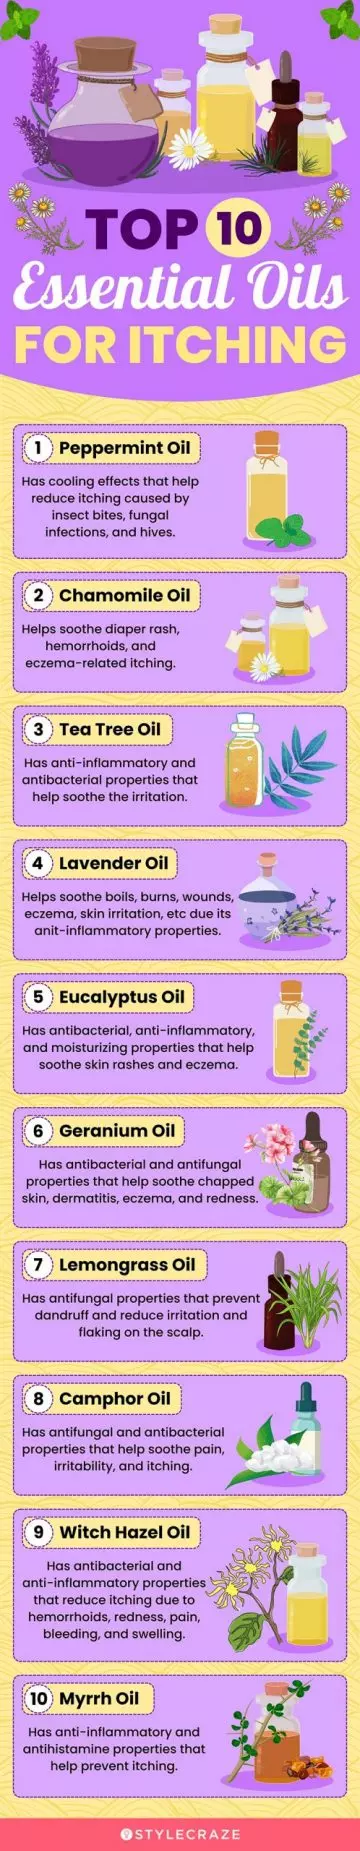 top 10 essential oils for itching (infographic)